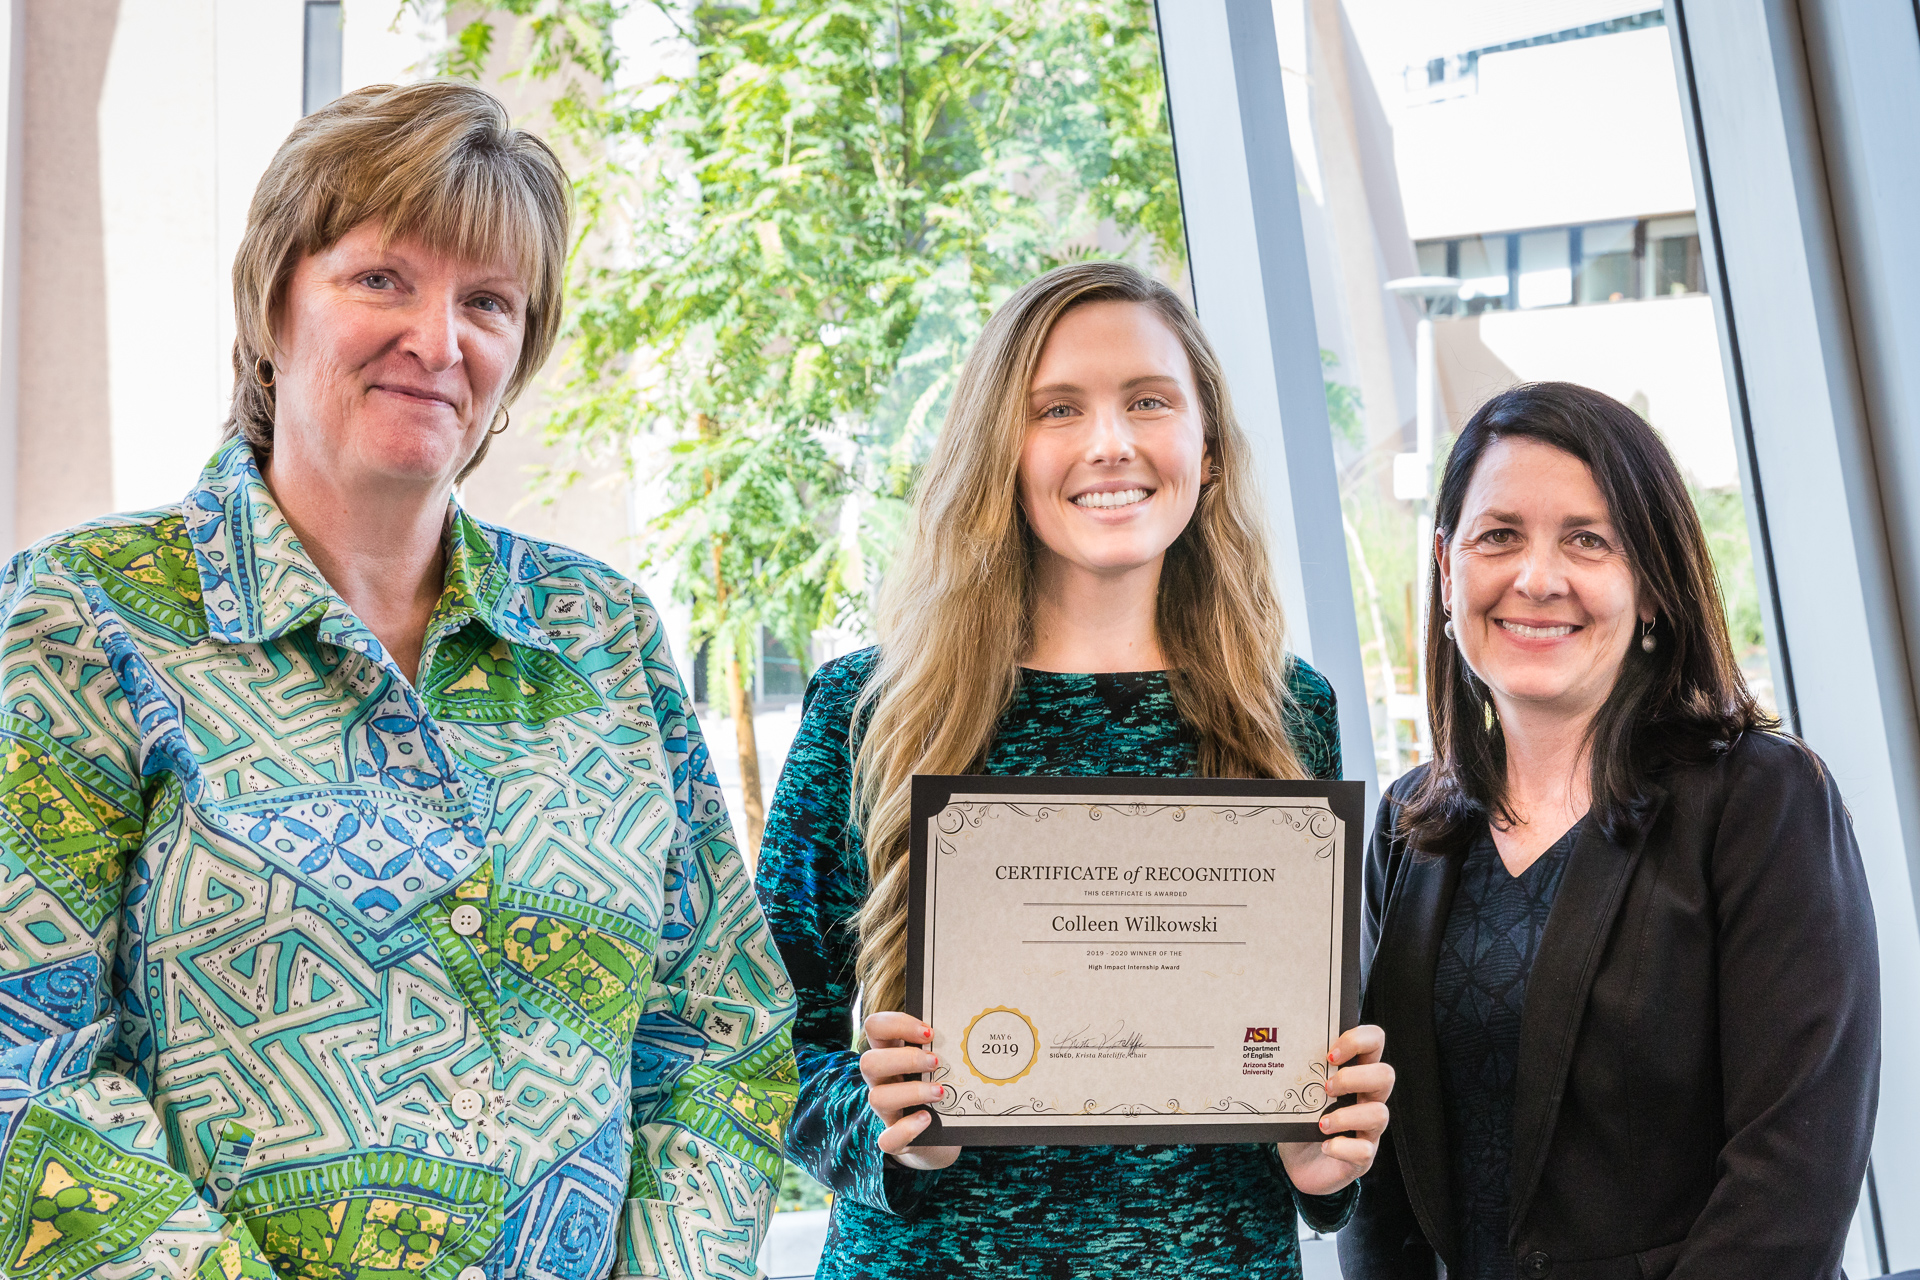 Collen Wilkowski was one of two recipients (with Easley) of the inaugural High Impact Internship Award from the Department of English in 2019. Here, she receives her award from English Chair Kris Ratcliffe (left) and Associate Chair Doris Warriner (right)